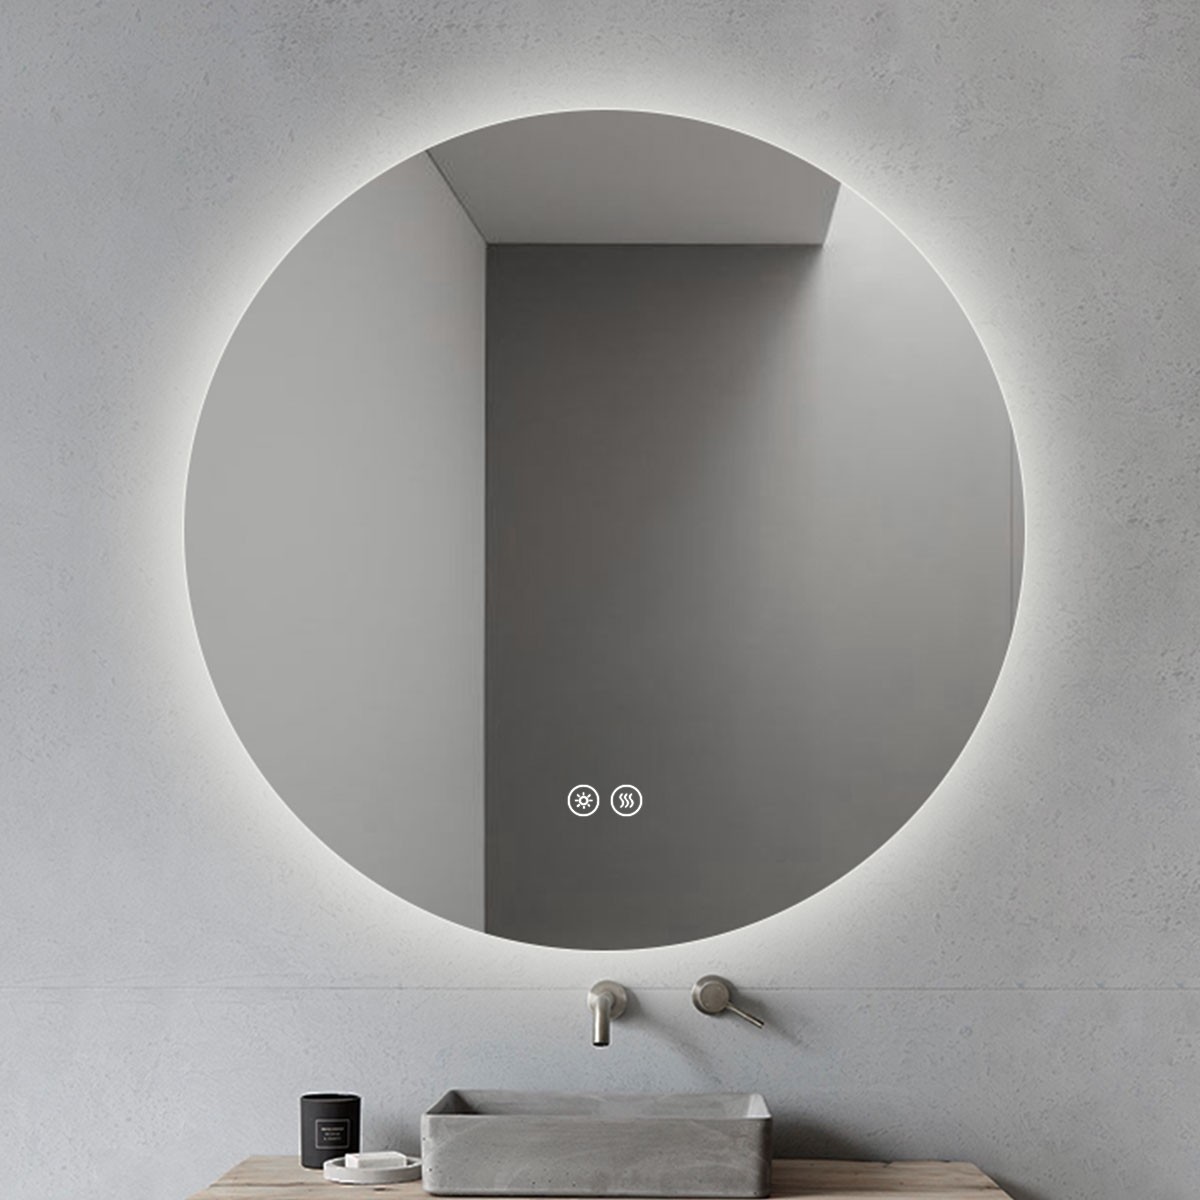 DECORAPORT 36 x 36 Inch LED Bathroom Mirror with Touch Button, Anti Fog, Dimmable, Vertical Mount (D1004-3636)